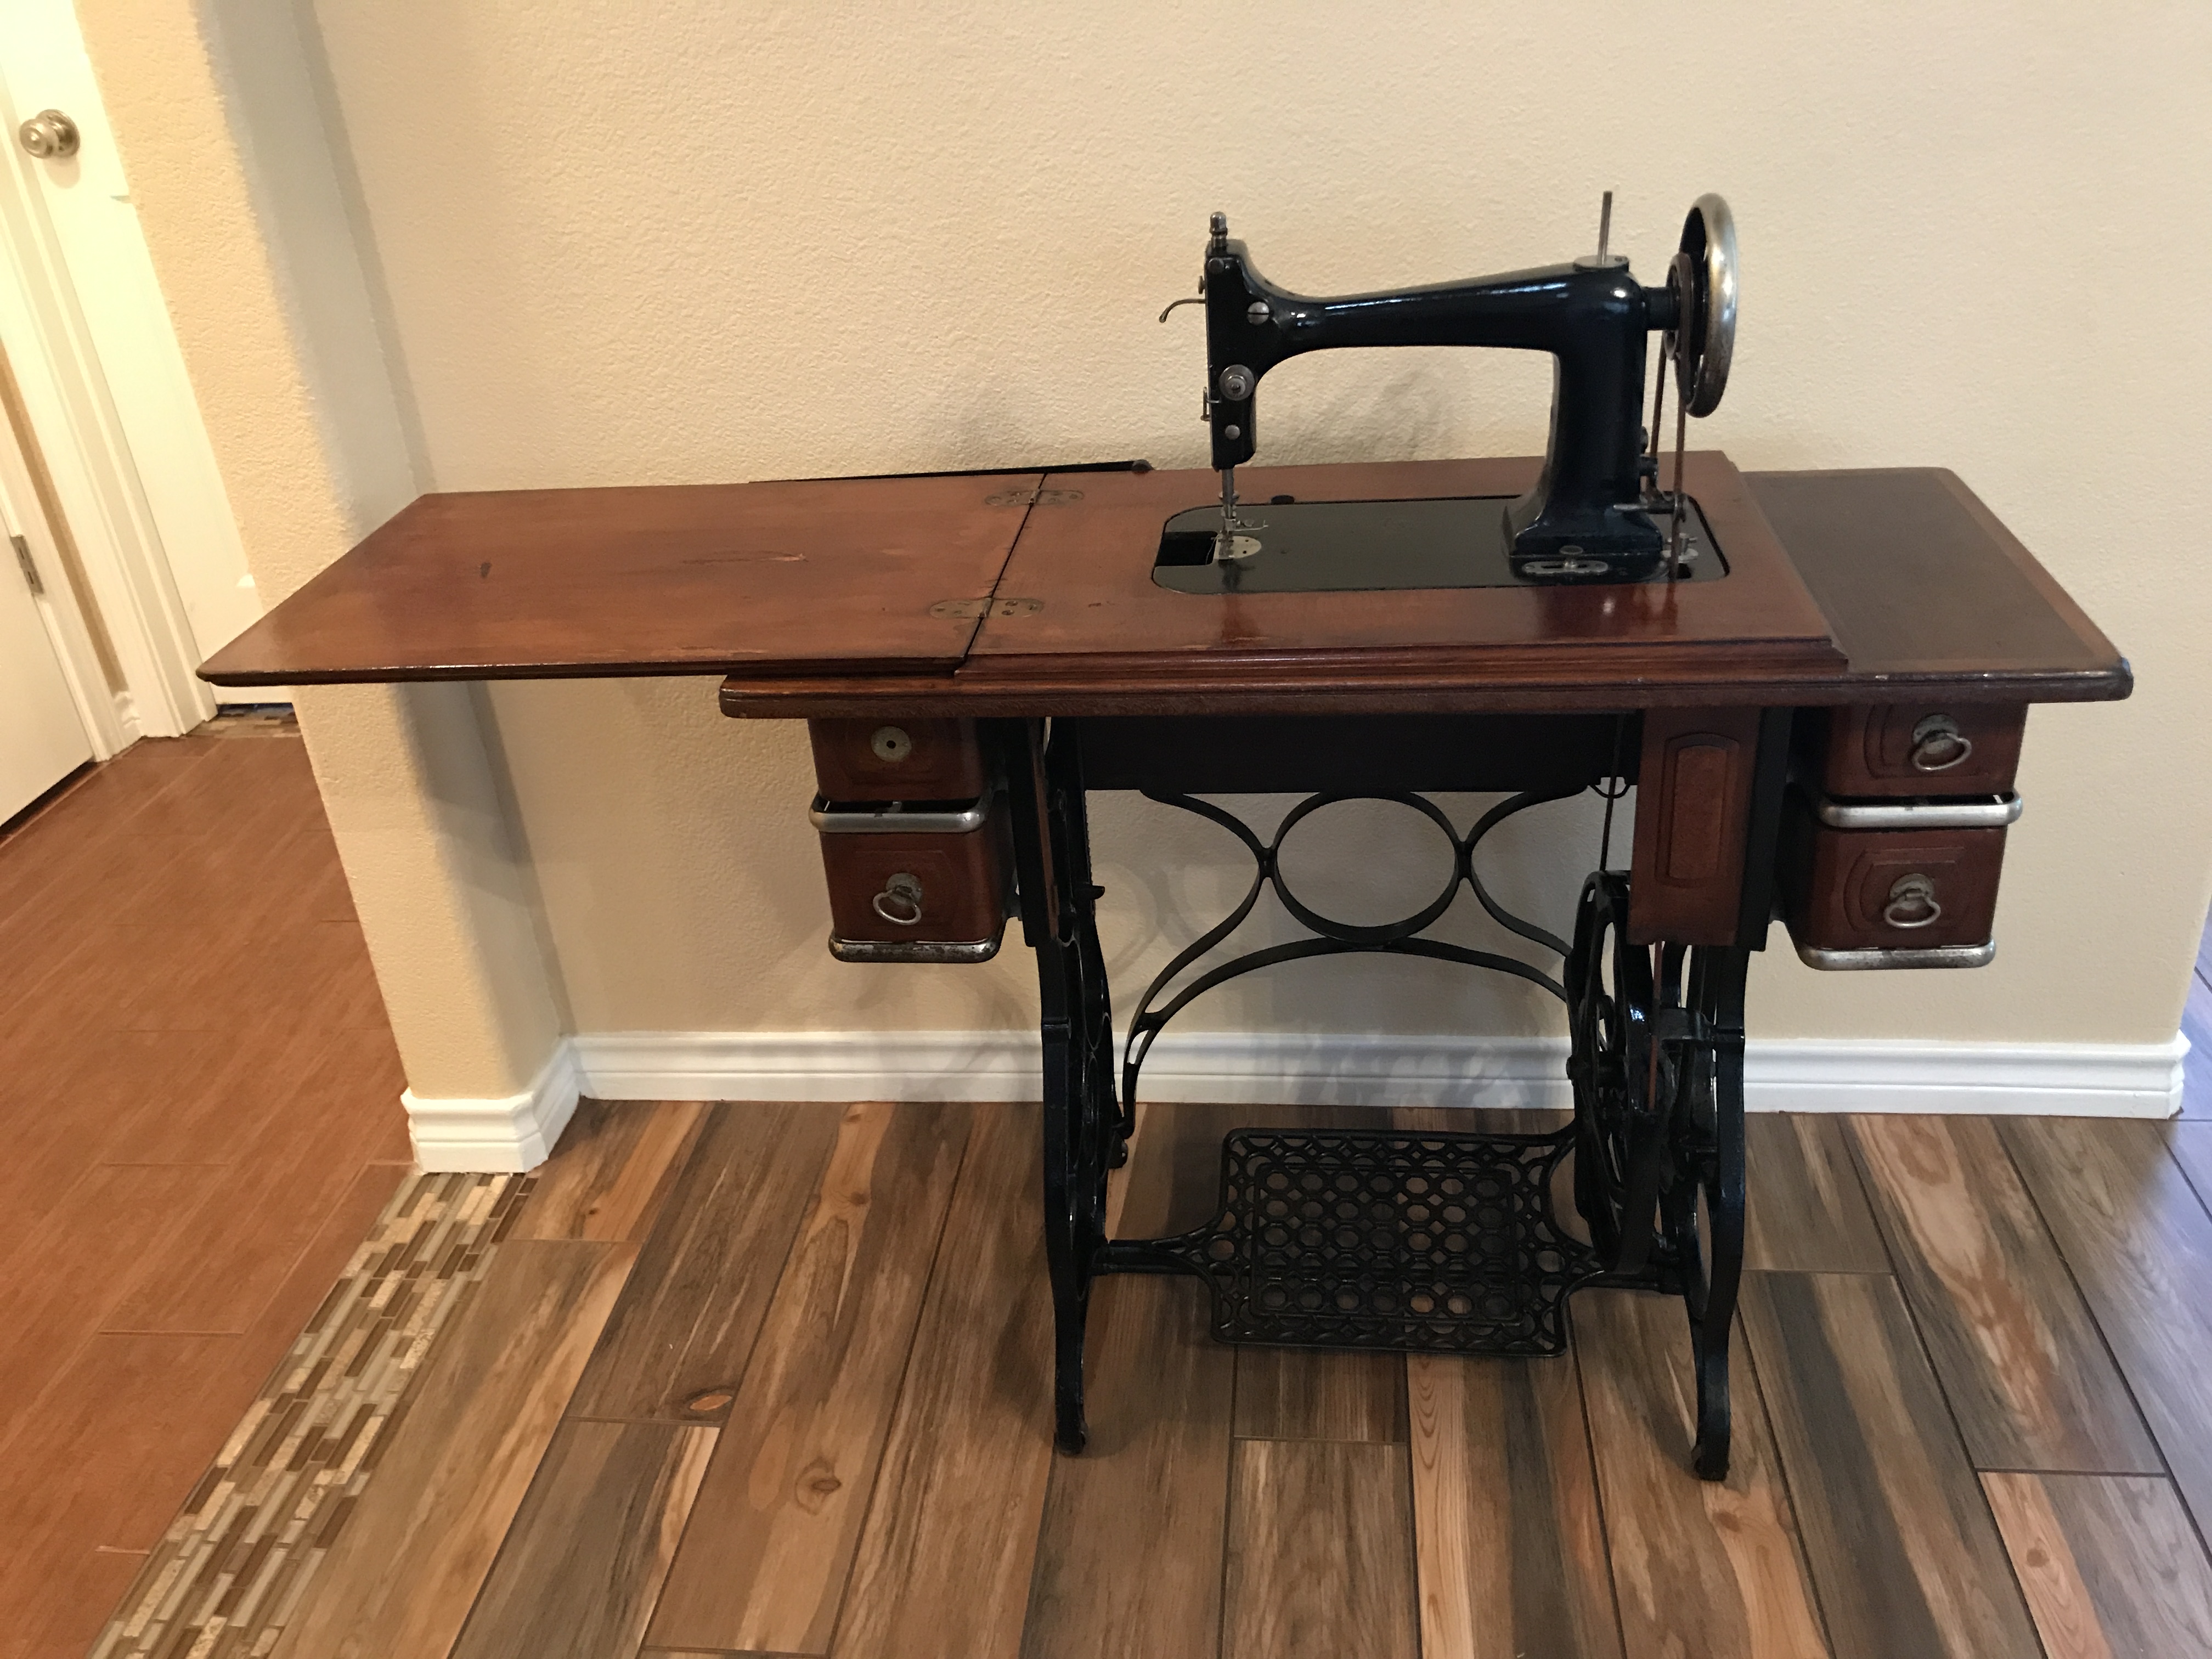 Standard treadle sewing machine - Quiltingboard Forums